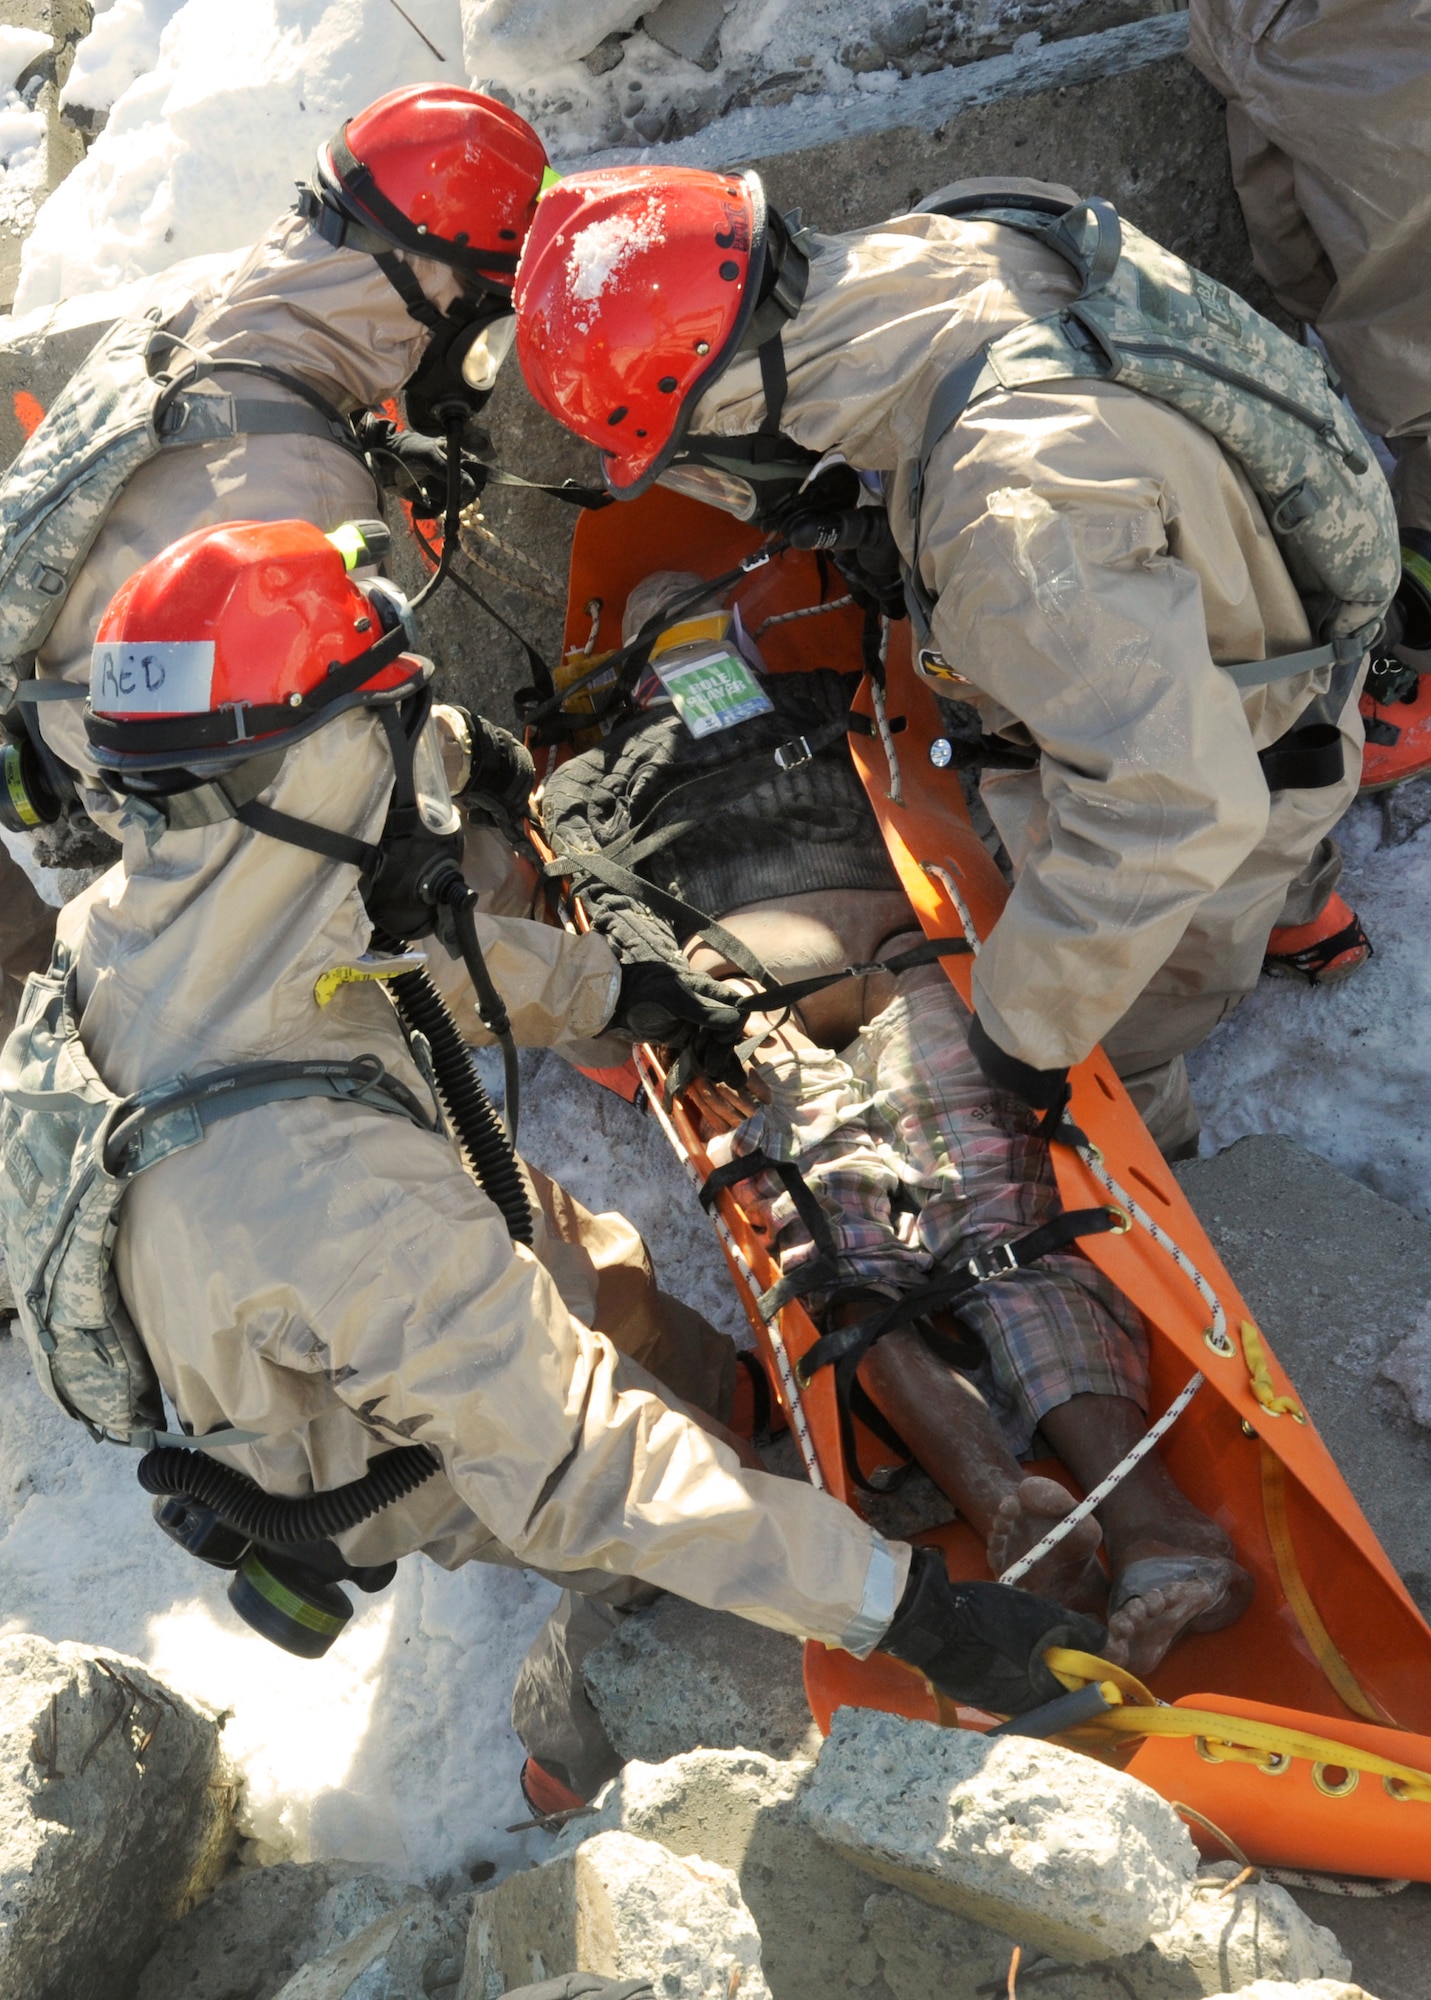 Members of the Oregon National Guard’s CBRNE Enhanced Response Force Package (CERFP), free a simulated victim that was trapped during the Vigilant Guard-Alaska 2014 exercise, near Joint Base Elmendorf-Richardson, Anchorage, Alaska, March 29, 2014. (U.S. Air National Guard photo by Tech. Sgt. John Hughel, 142nd Fighter Wing Public Affairs/Released)